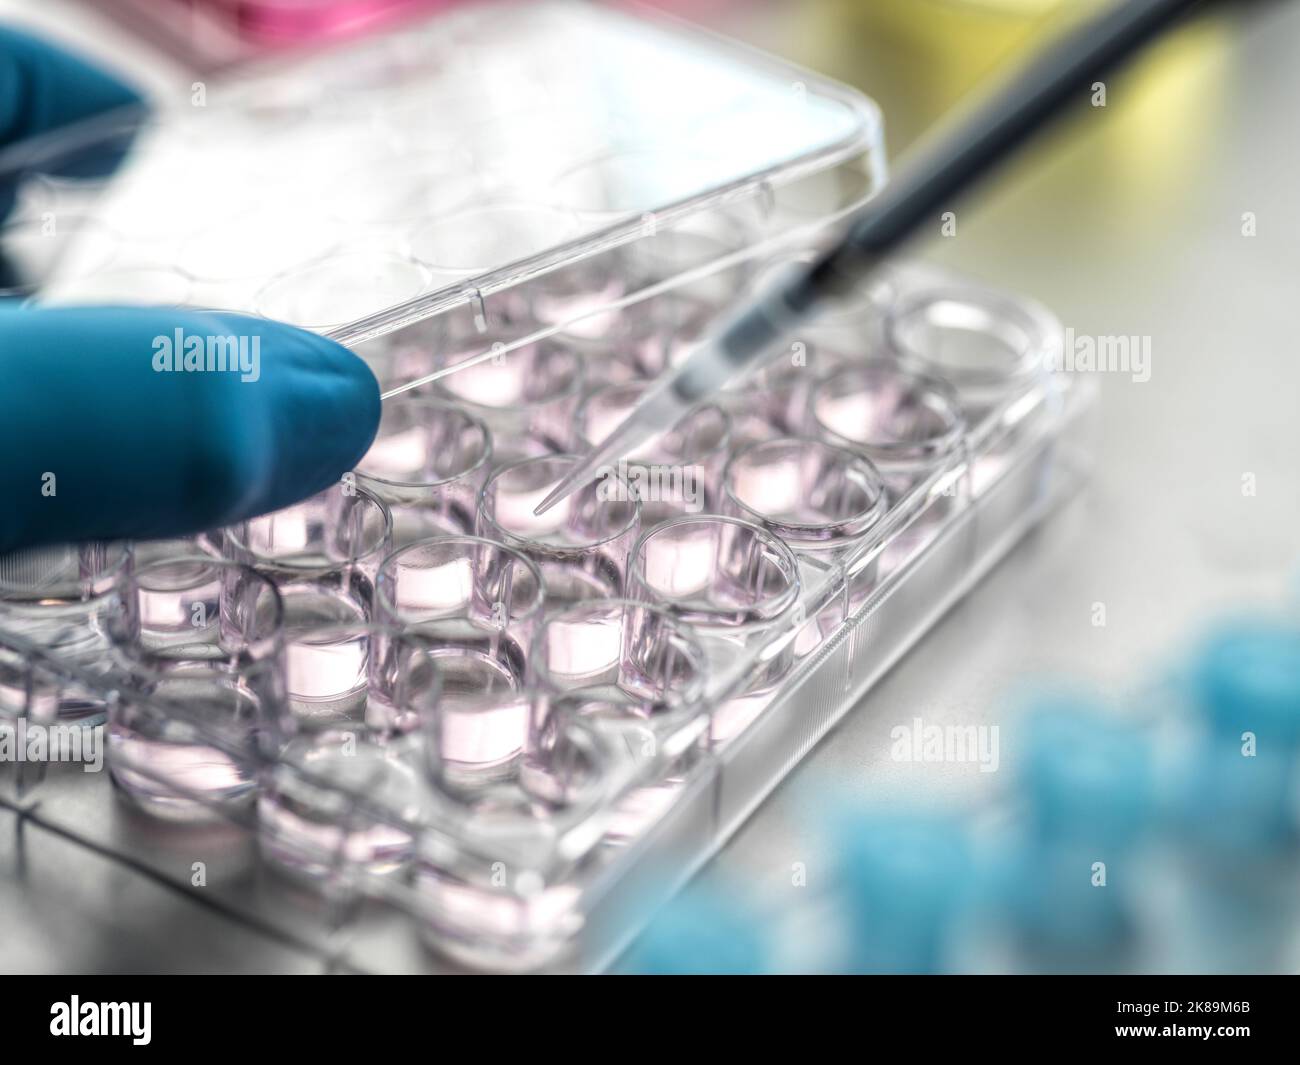 Pharmaceutical research Stock Photo